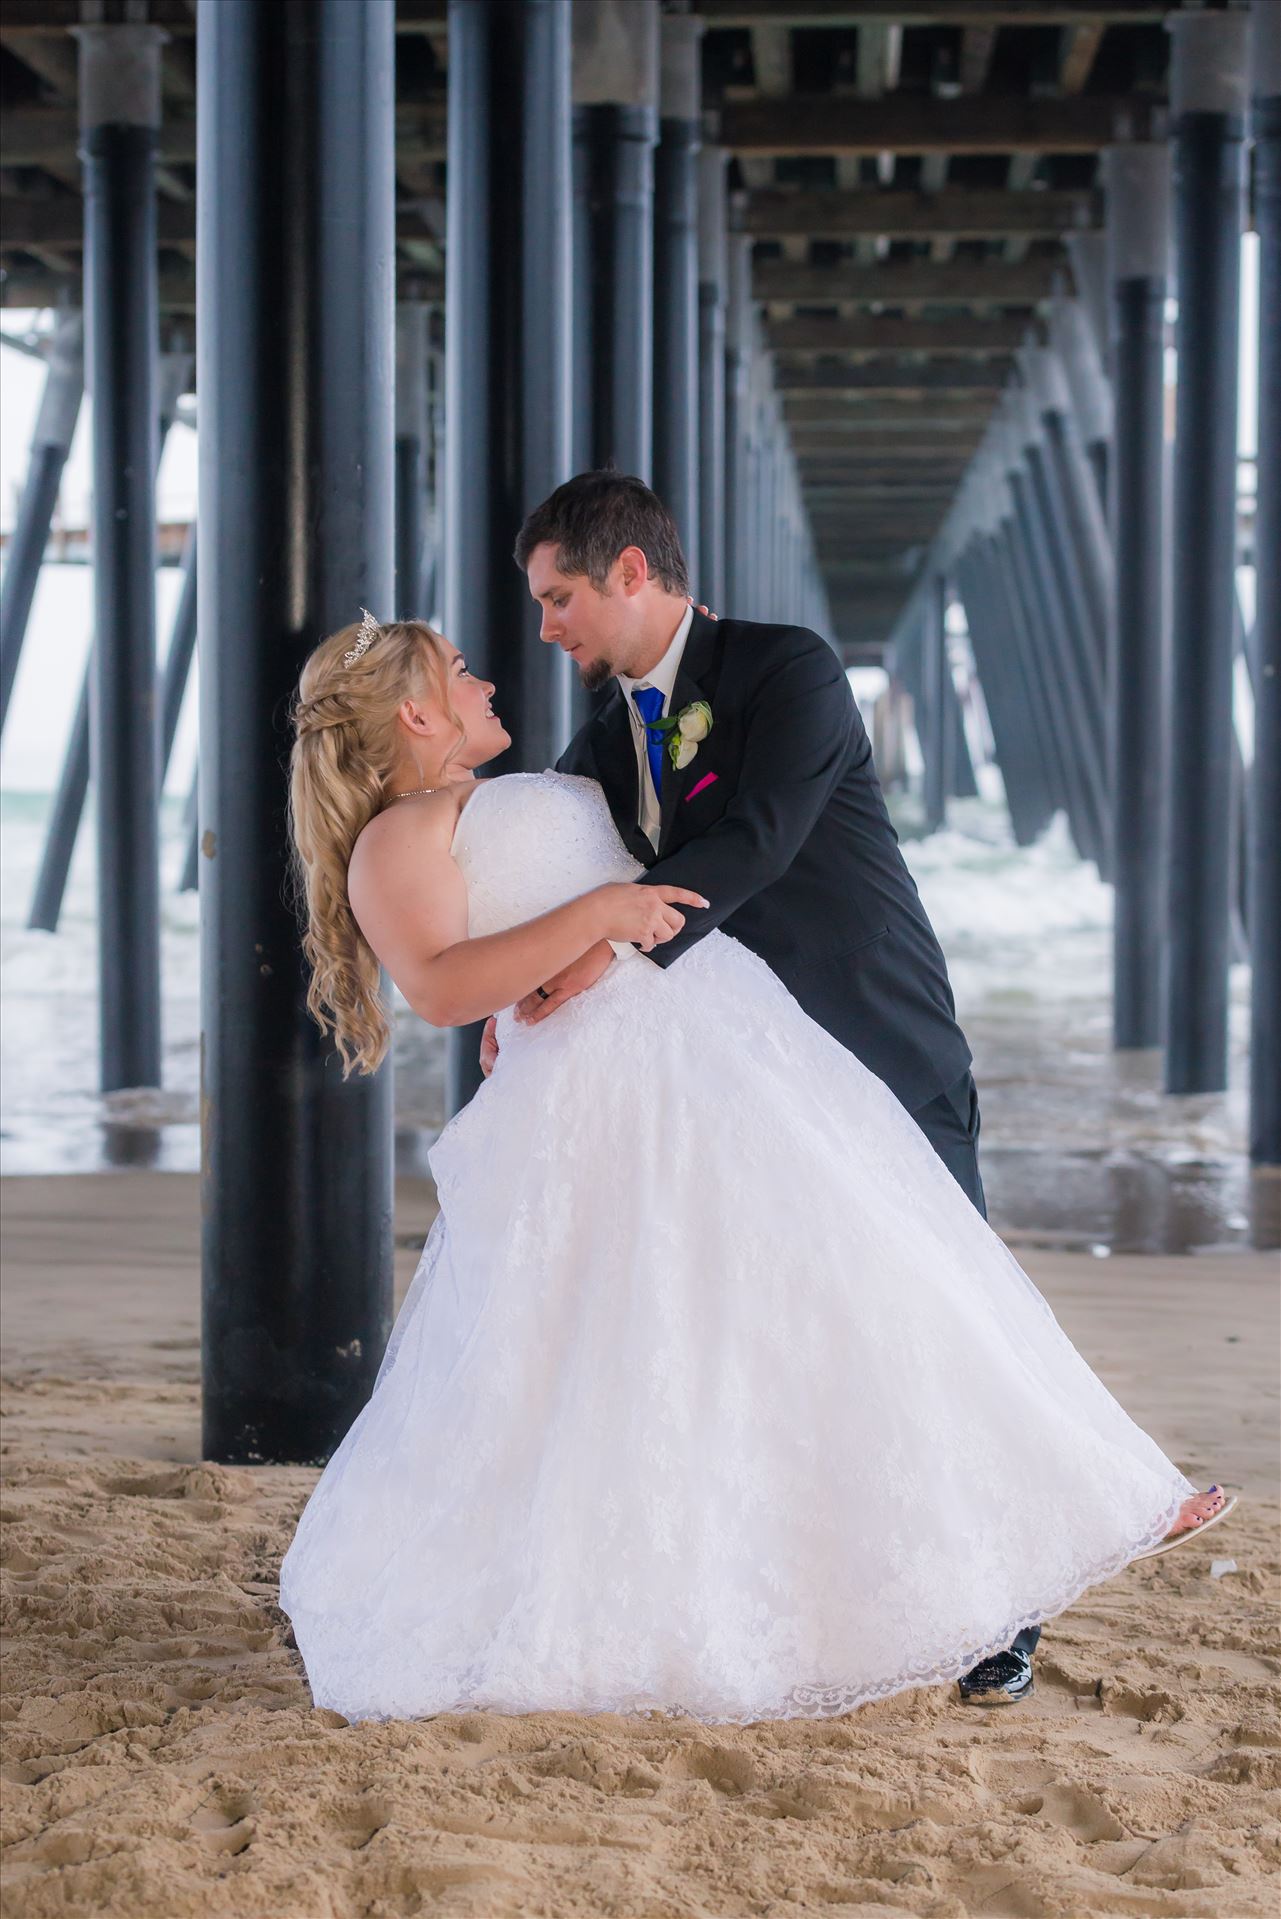 Jessica and Michael 69 - Sea Venture Resort and Spa Wedding Photography by Mirror's Edge Photography in Pismo Beach, California. Bride and Groom under Pismo Beach Pier by Sarah Williams